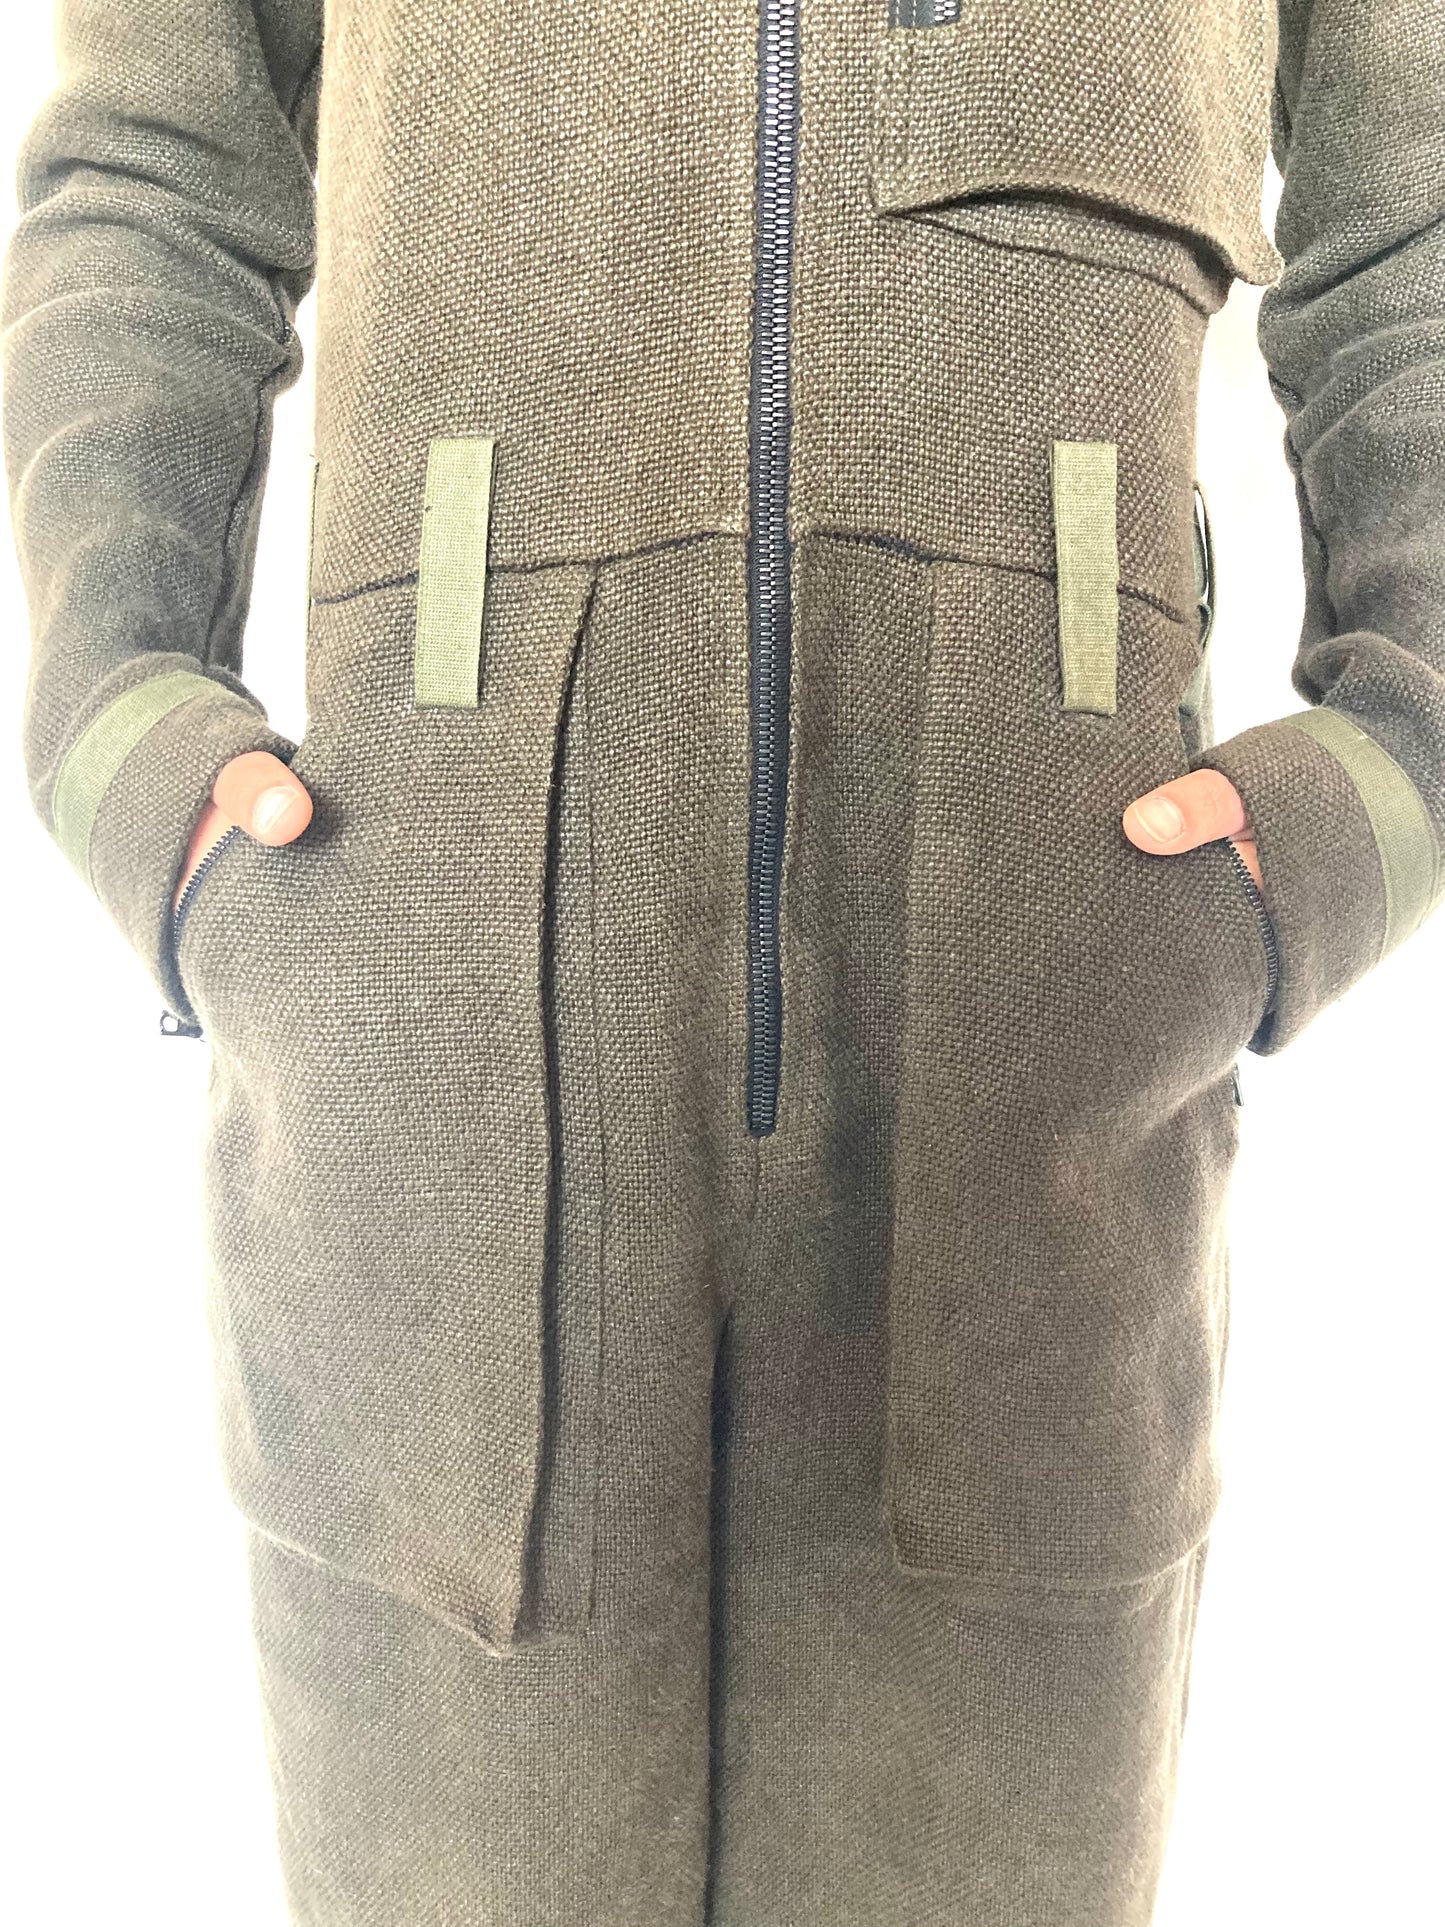 KNG13 || FULL BODY COVERALLS || HEAVY LINEN - OLIVE GREEN